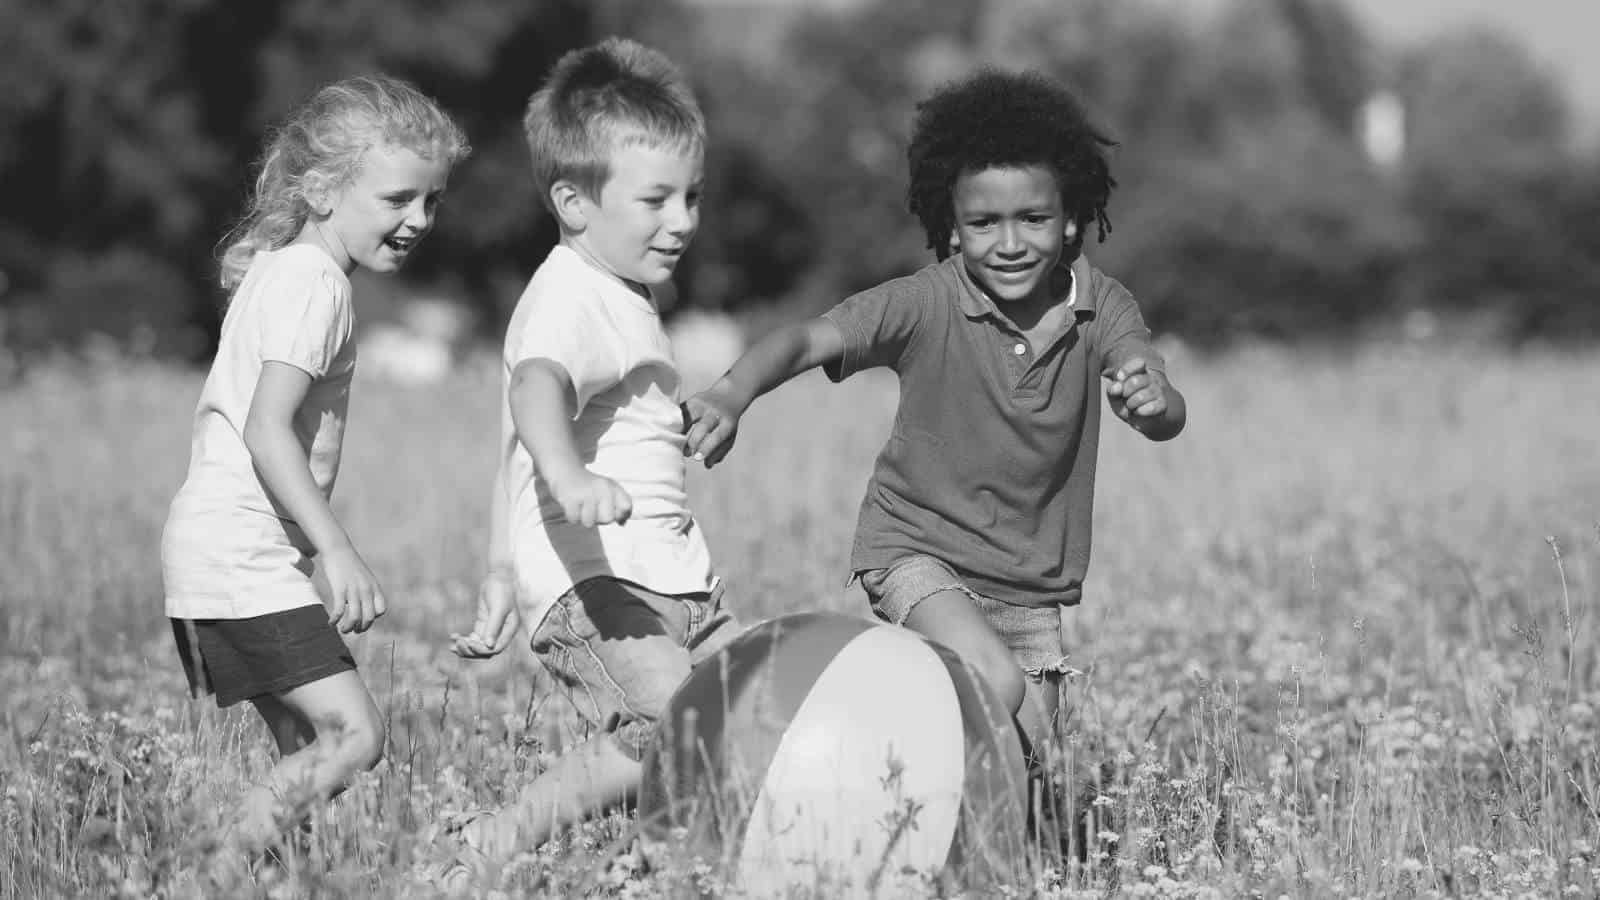 Psychologist Explains 4 Ways To Help Children Learn to Respect Others